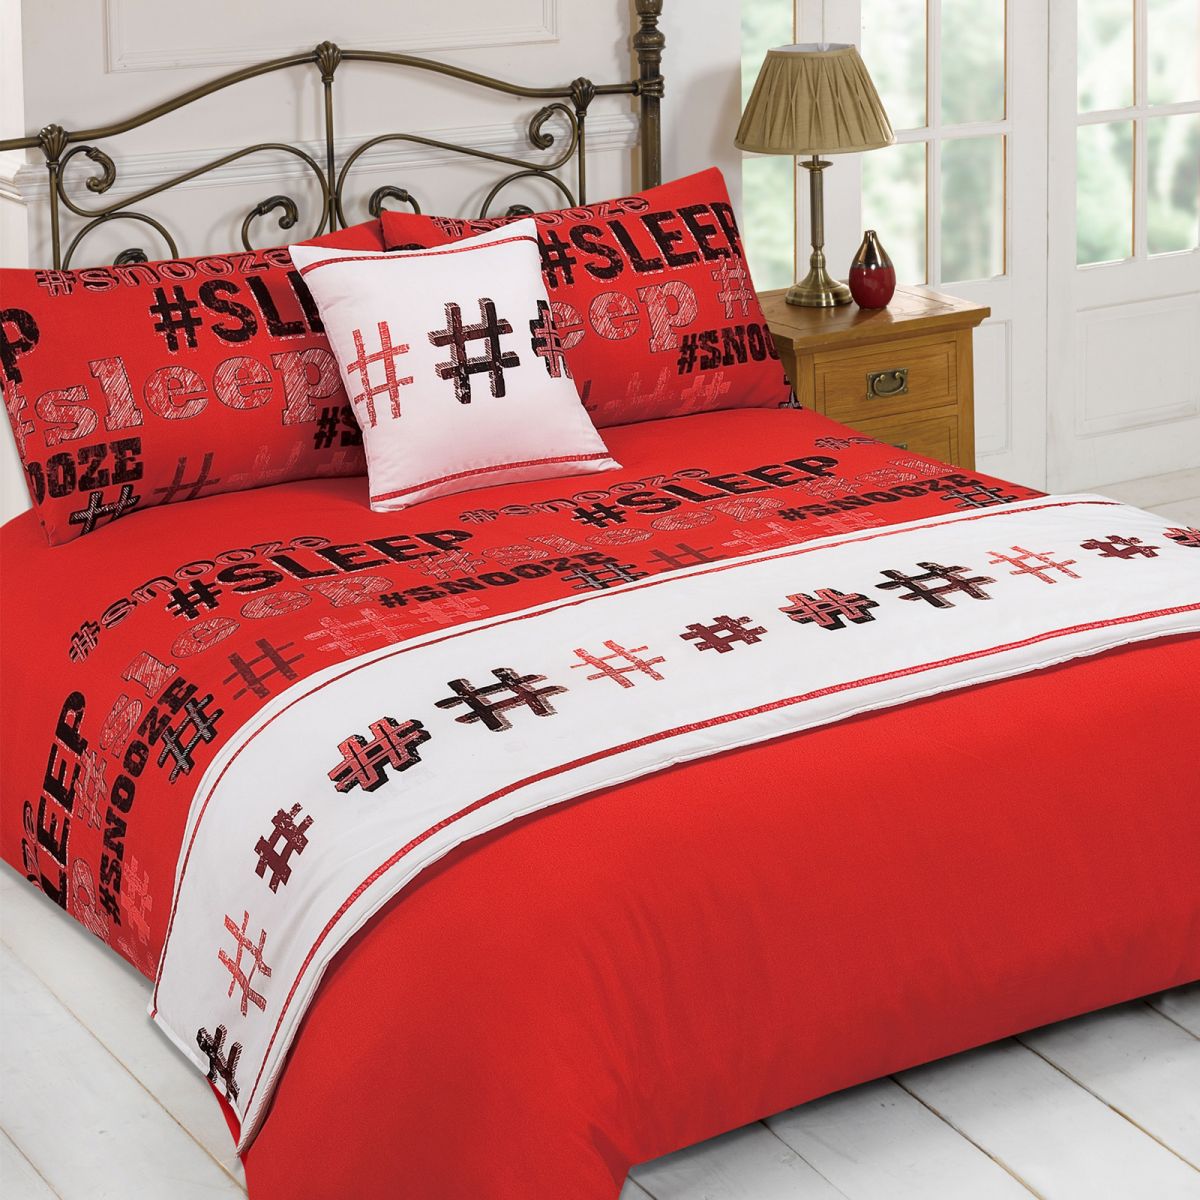 Dreamscene Hashtag 5 Piece Bed in a Bag Set Red - Single